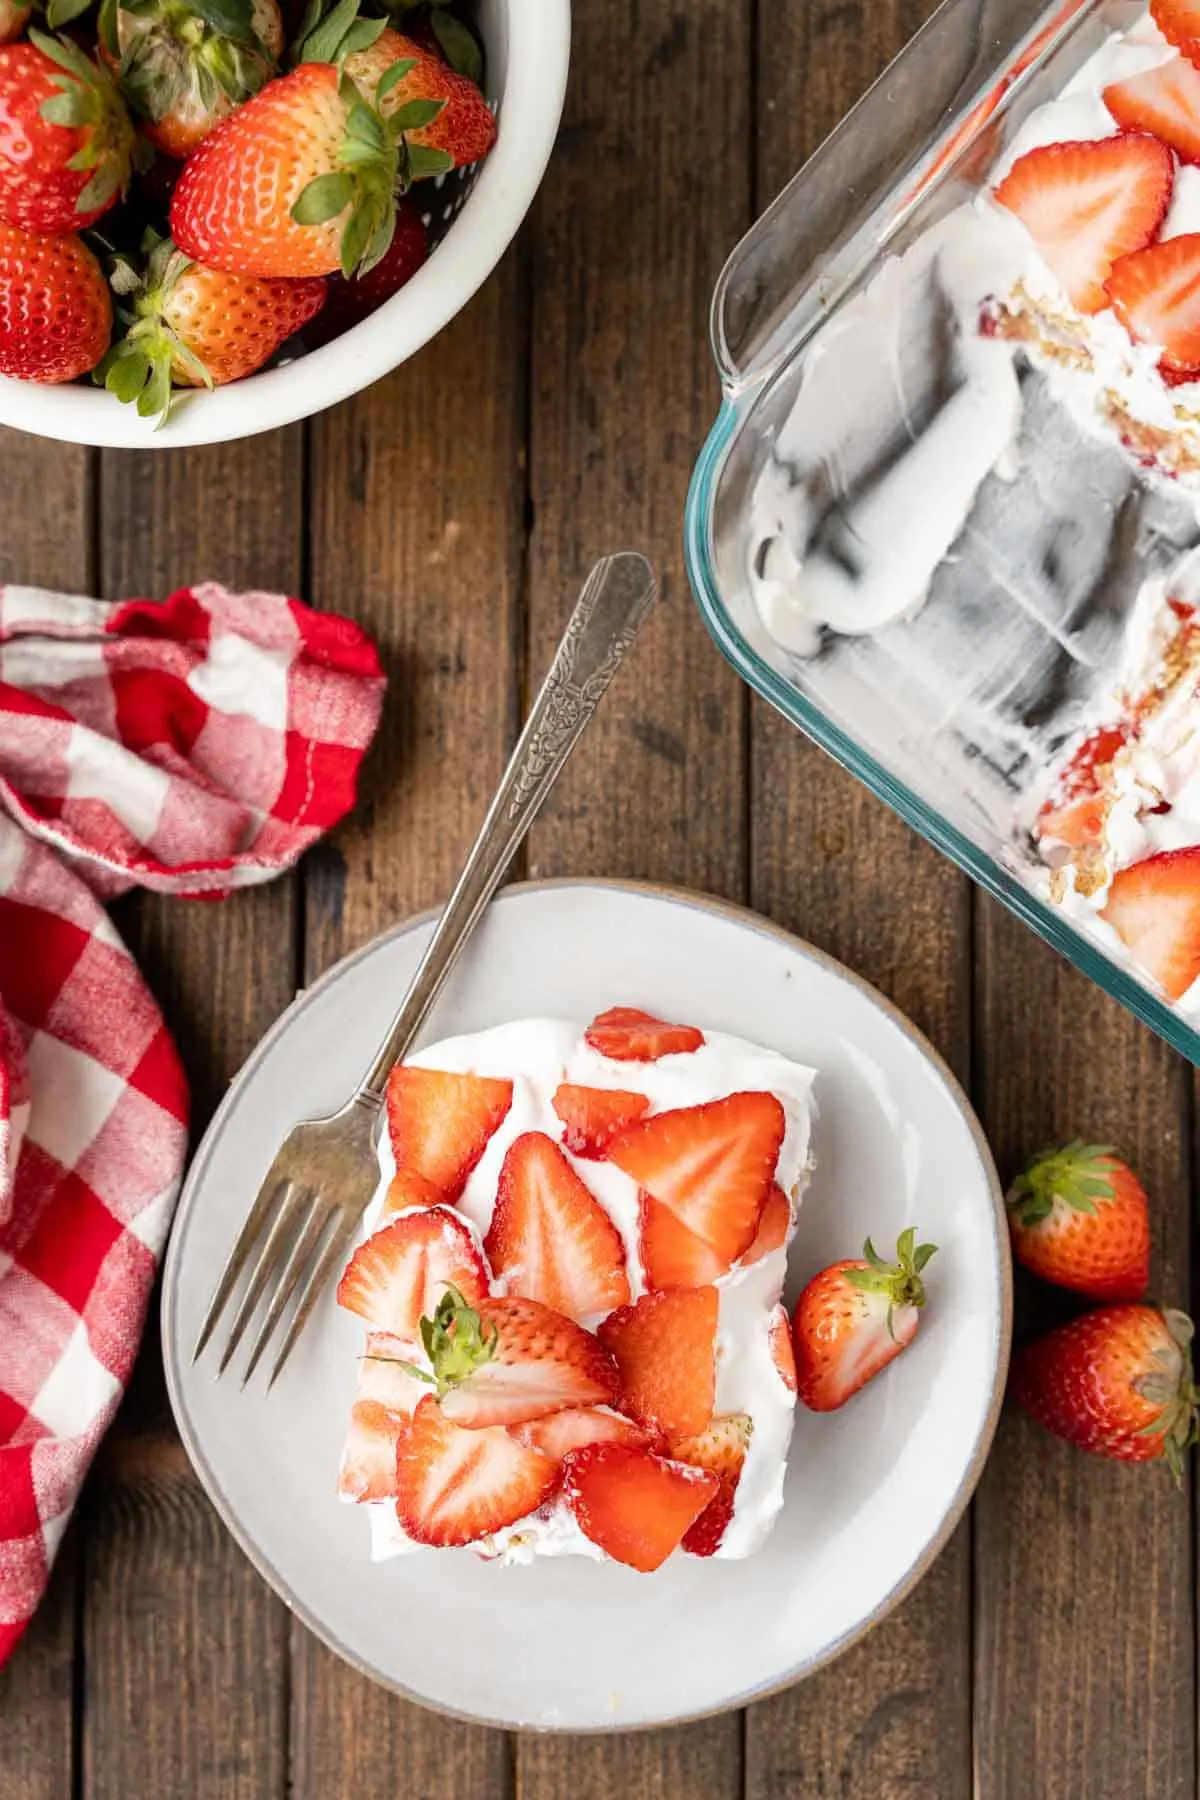 Strawberry Icebox Cake is a 3 ingredient no bake dessert recipe made with graham crackers, Cool Whip and fresh strawberries.